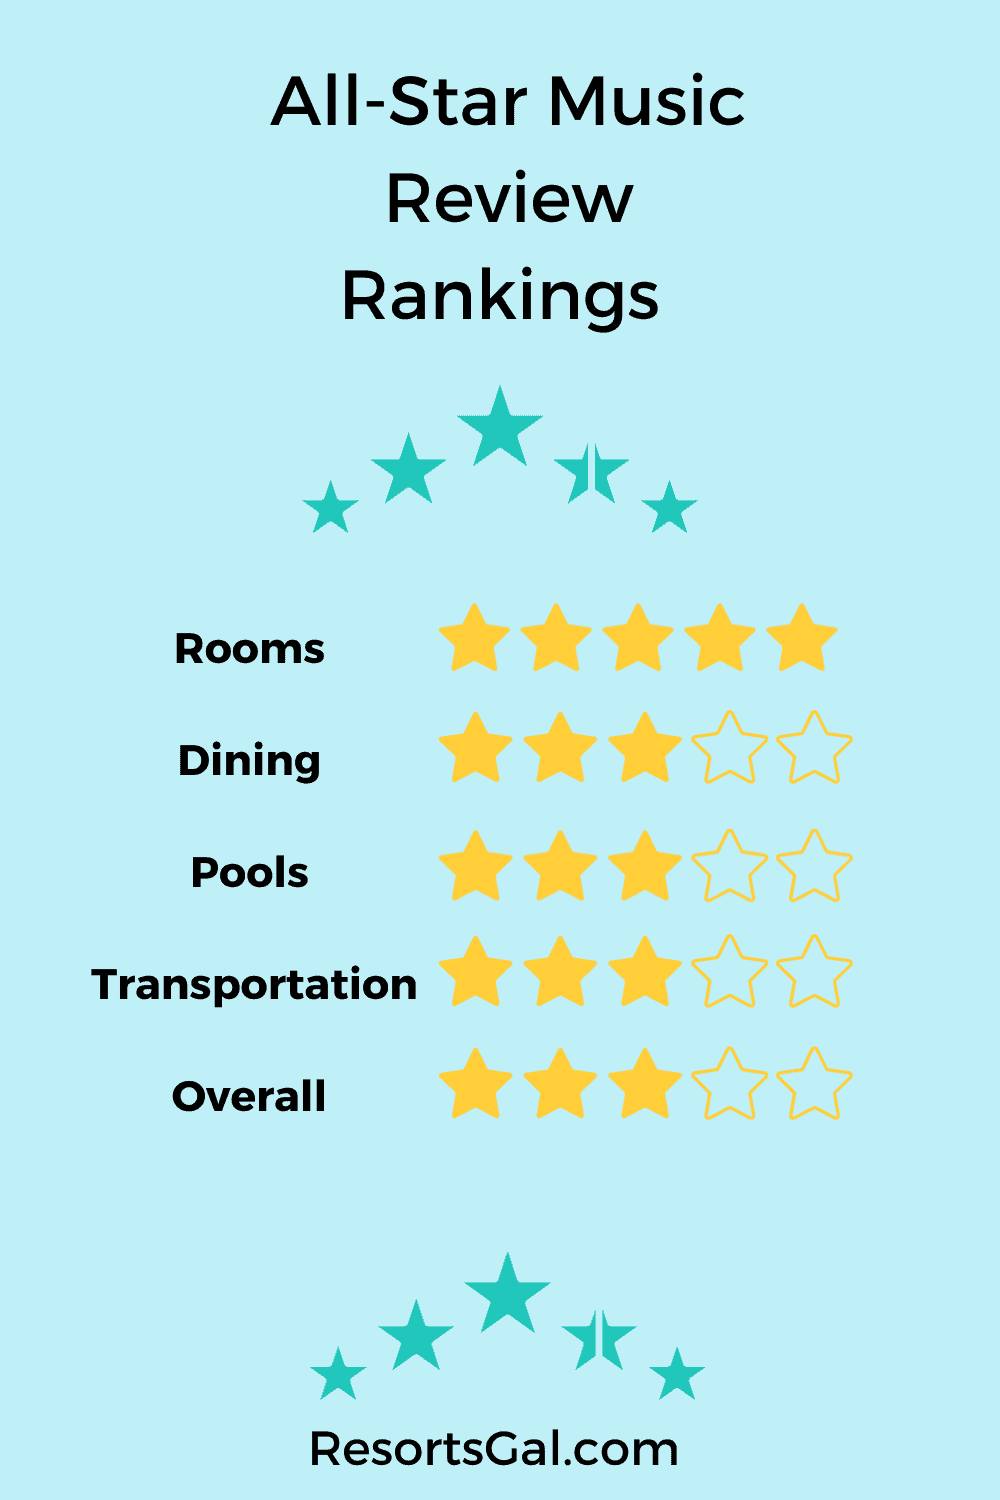 All-Star Music Review Rankings with 1 to 5 stars for each category. 